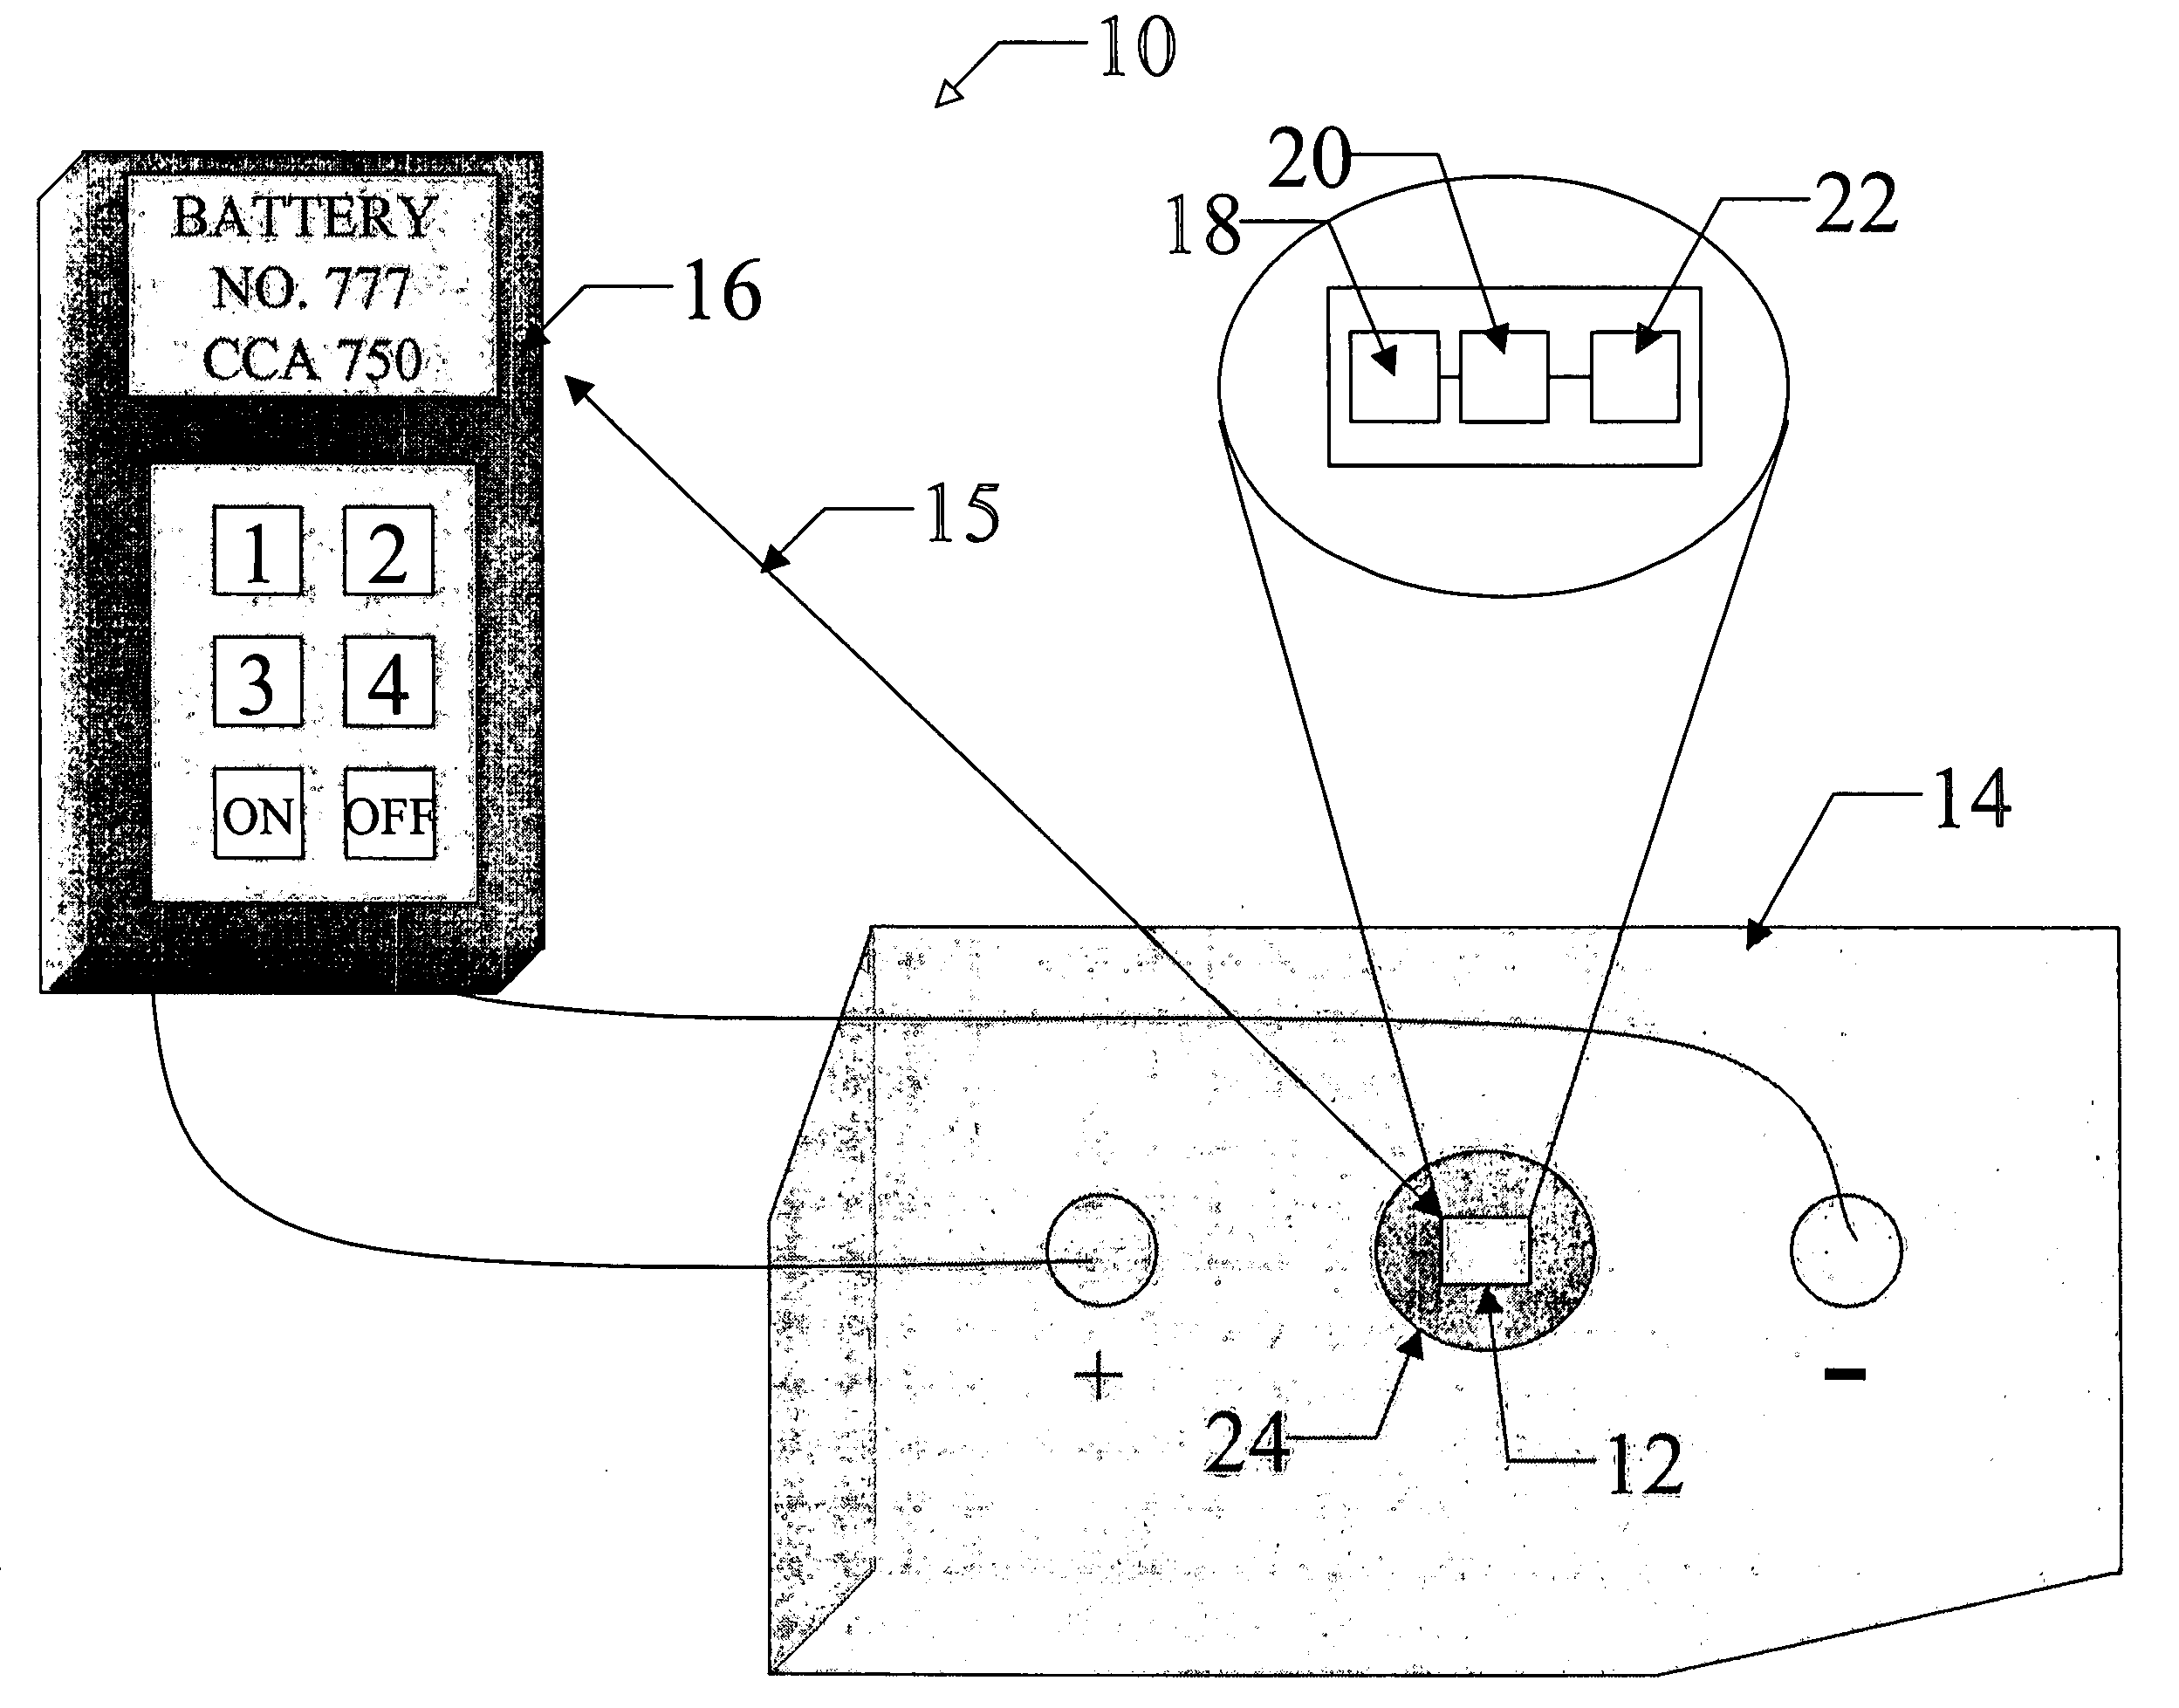 Systems and methods for monitoring and storing performance and maintenance data related to an electrical component